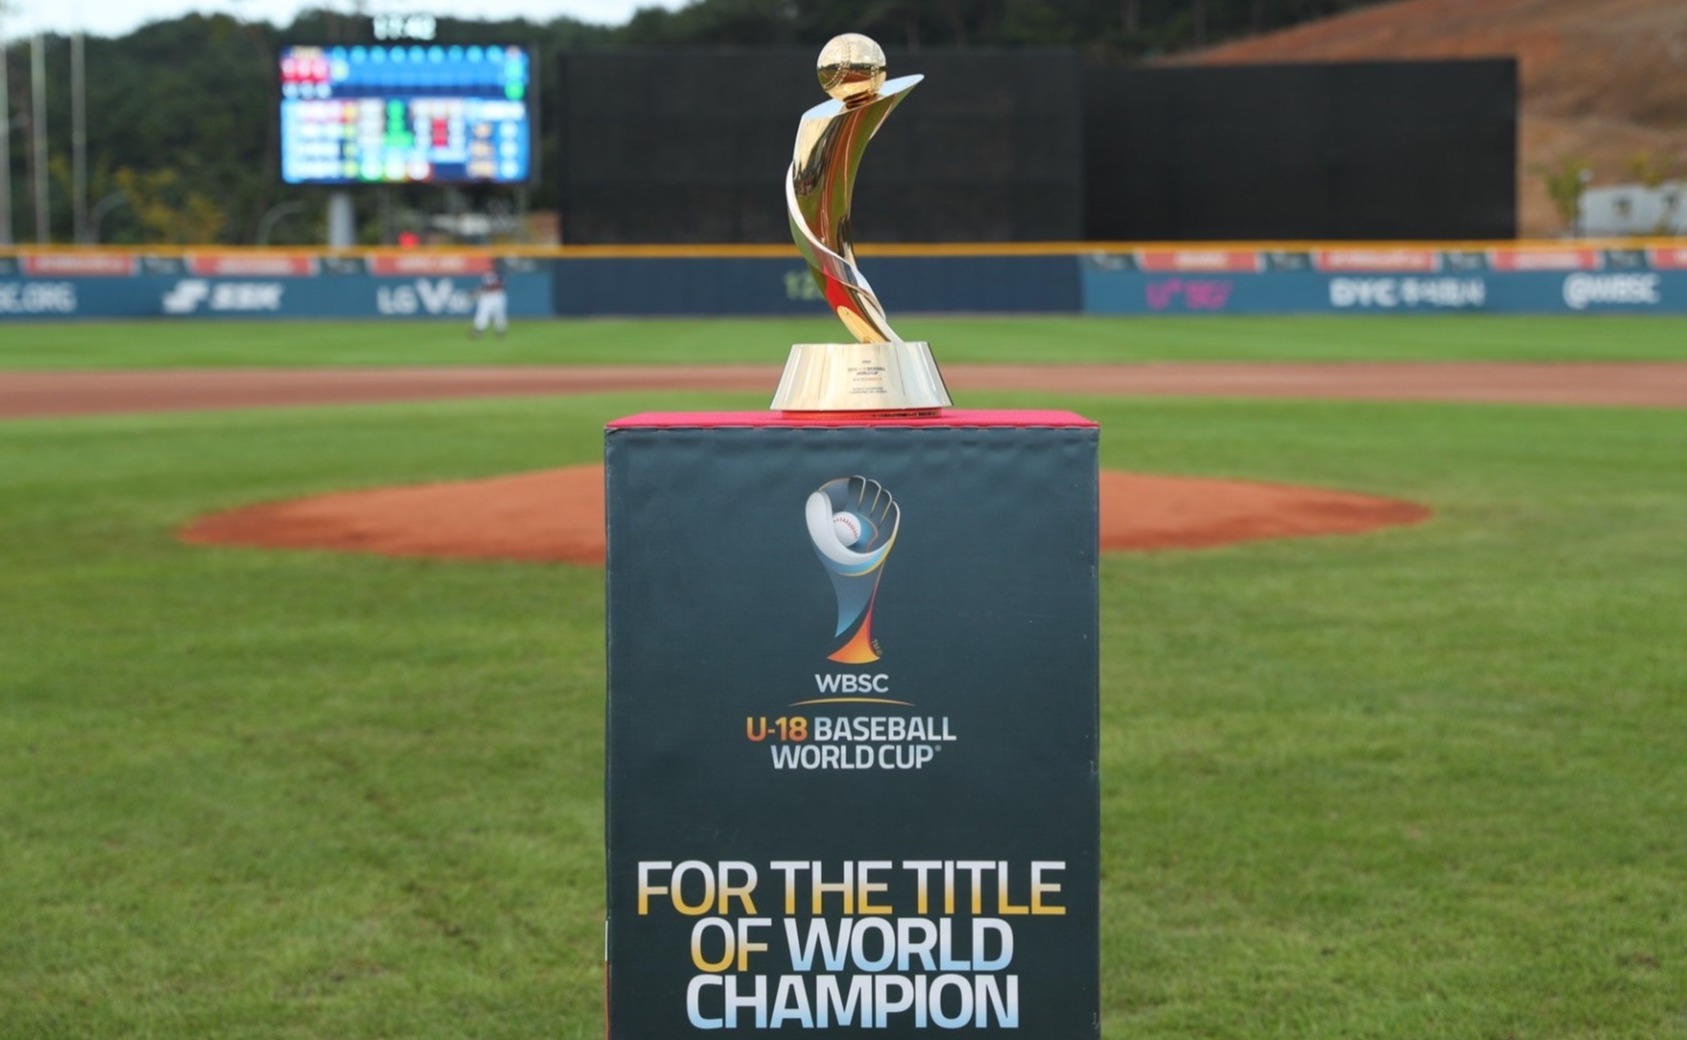 Groups, schedule announced for WBSC U-18 Baseball World Cup 